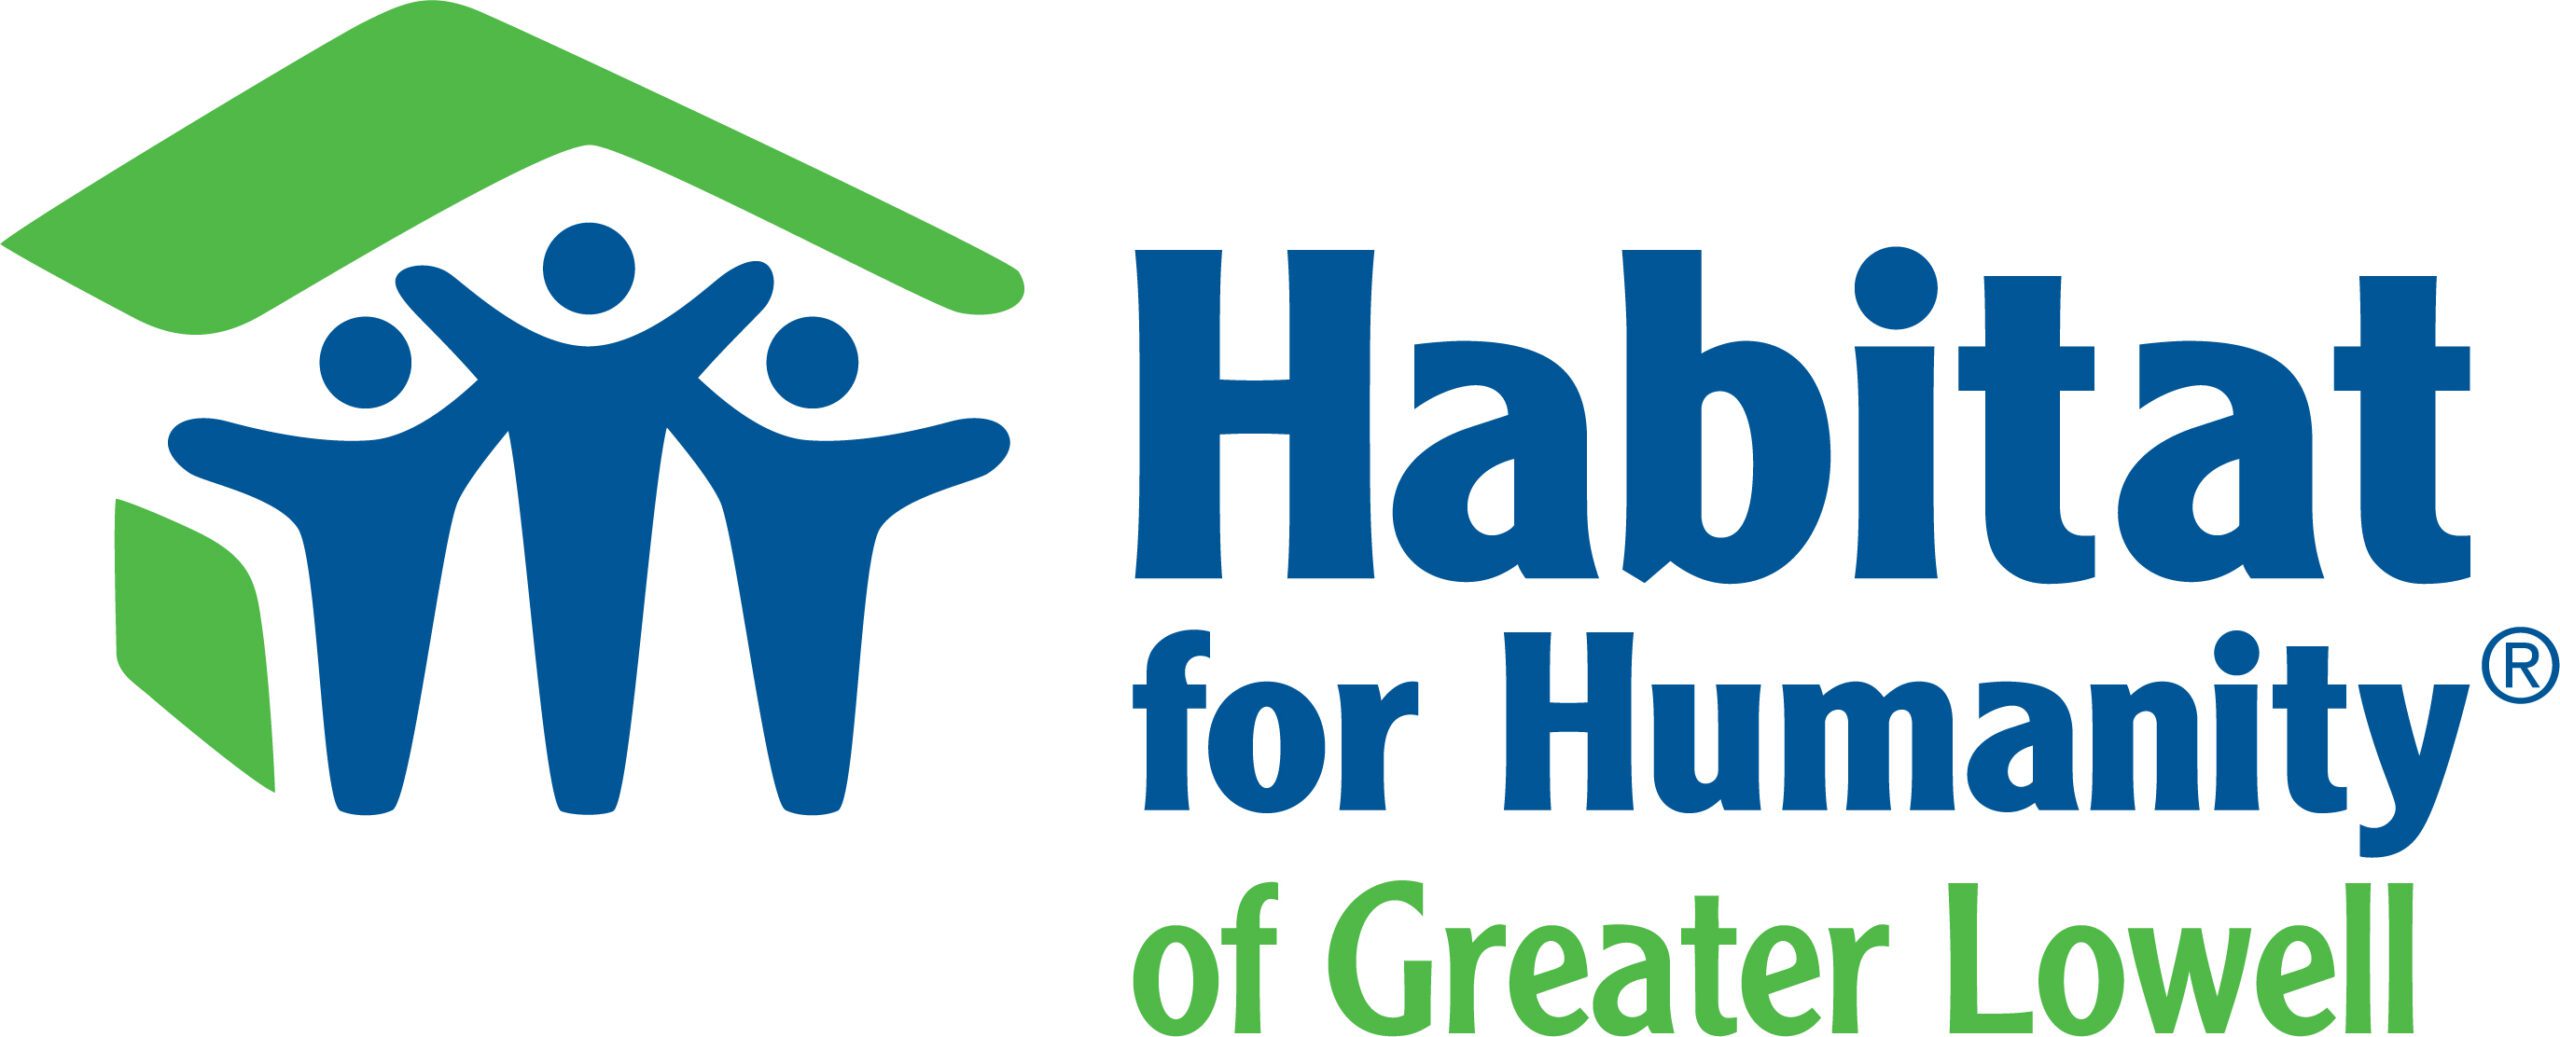 restore habitat for humanity of greater lowell